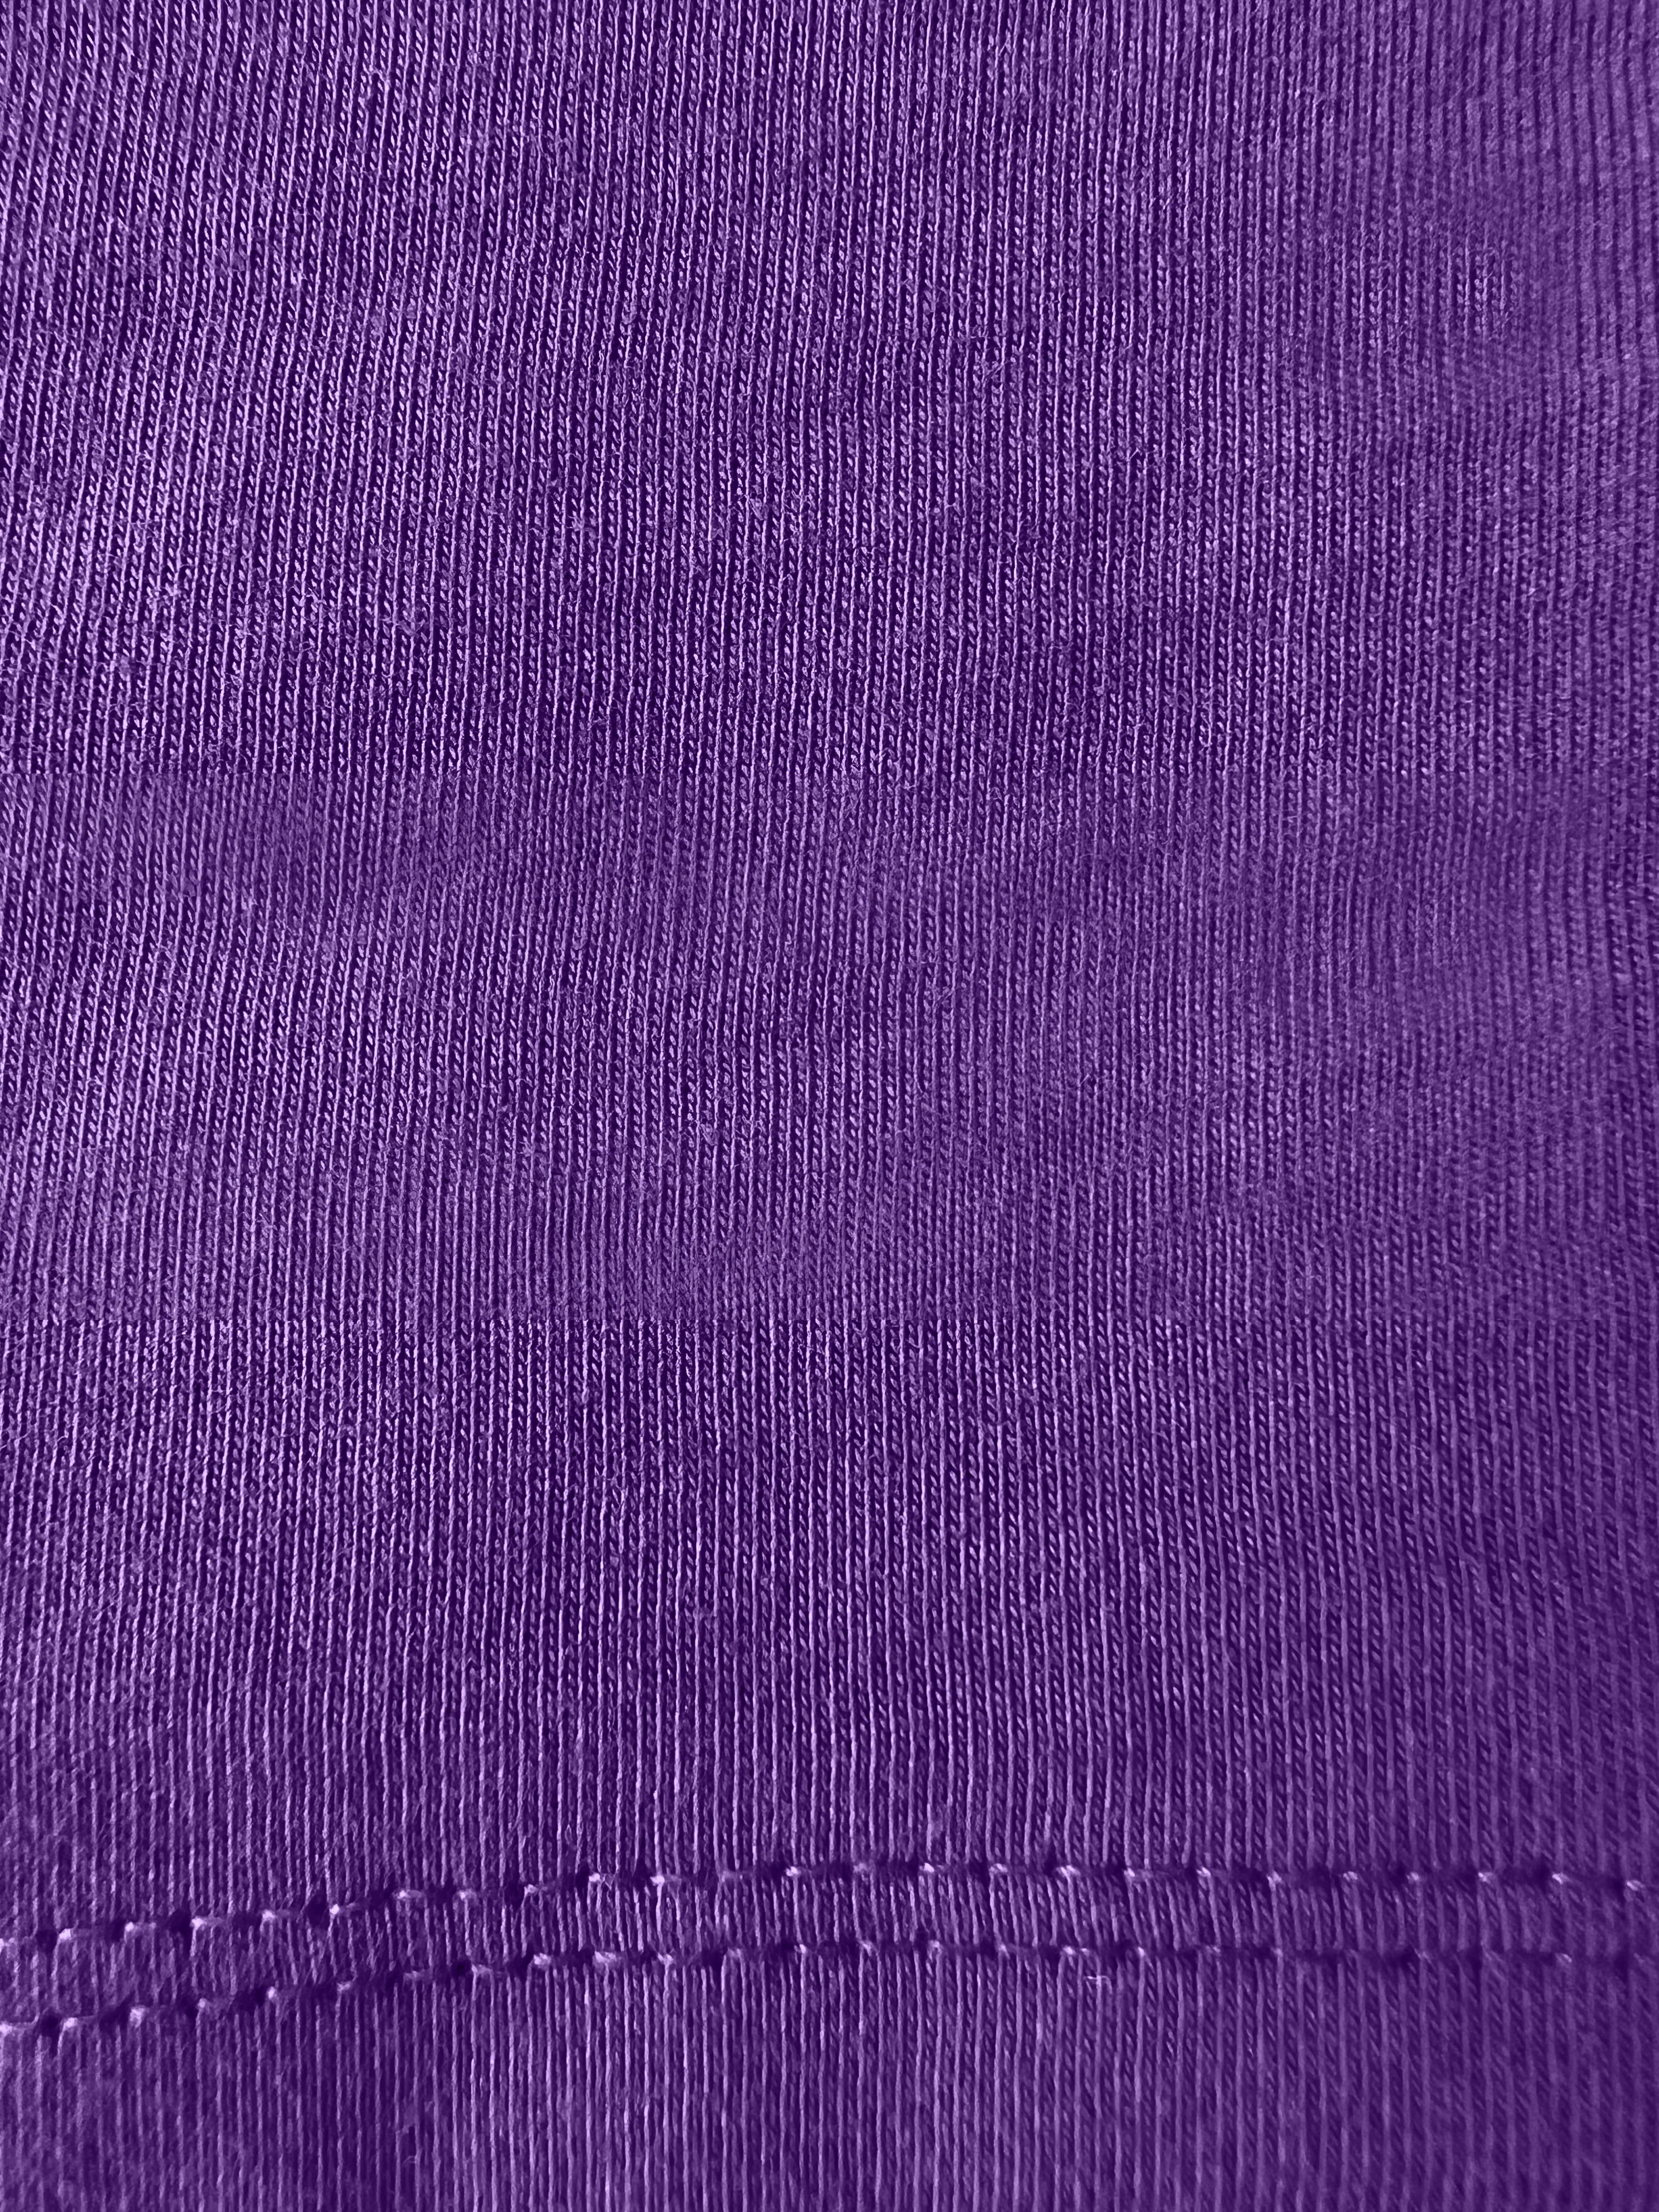 Crew Neck Purple plain T-shirt made with high quality cotton